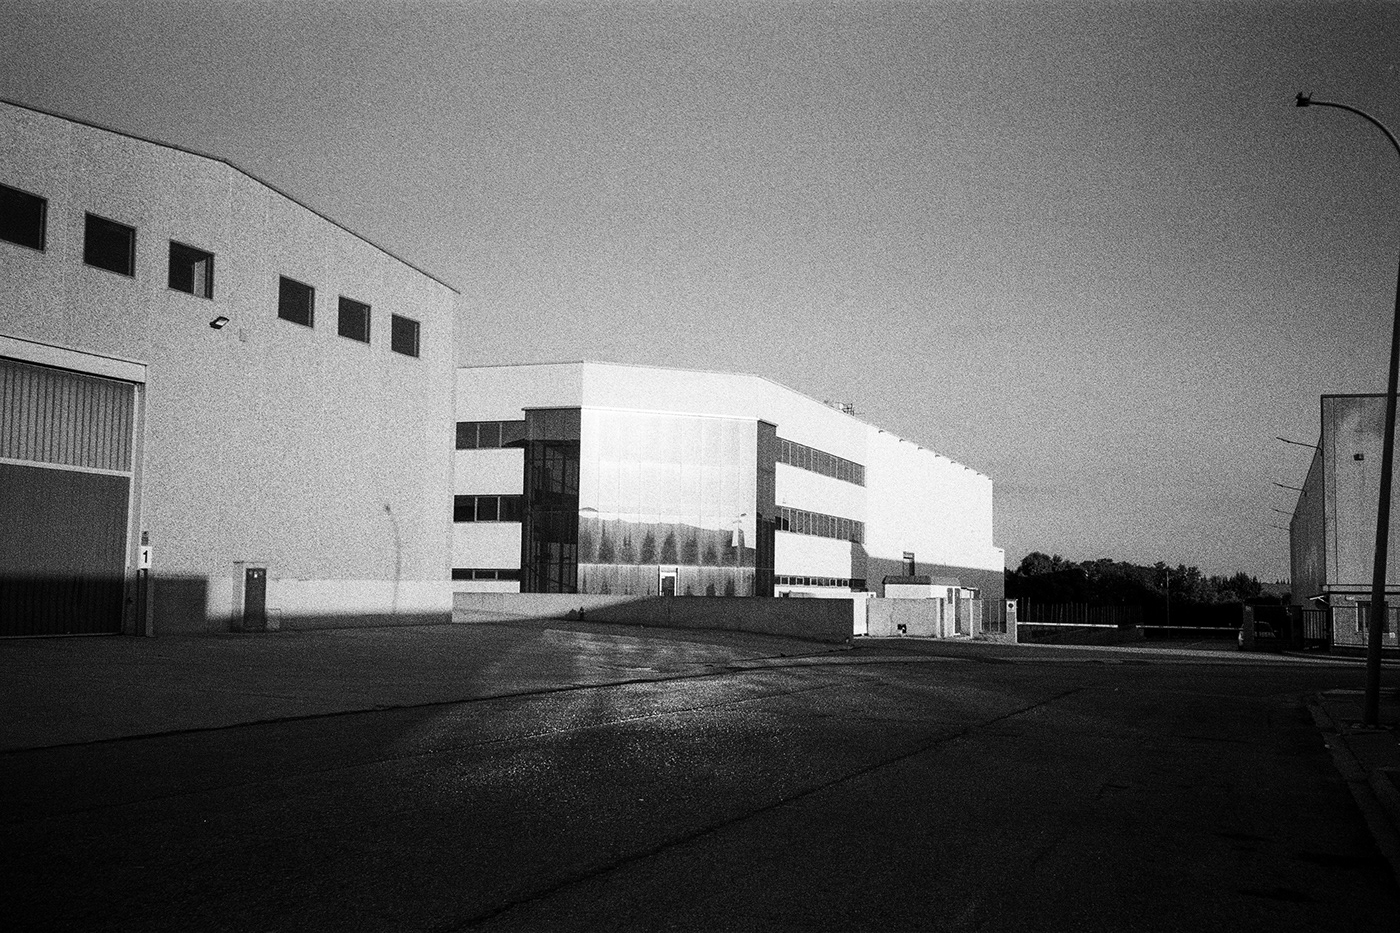 35mm Film   hp5 ILFORD industrial Photography 